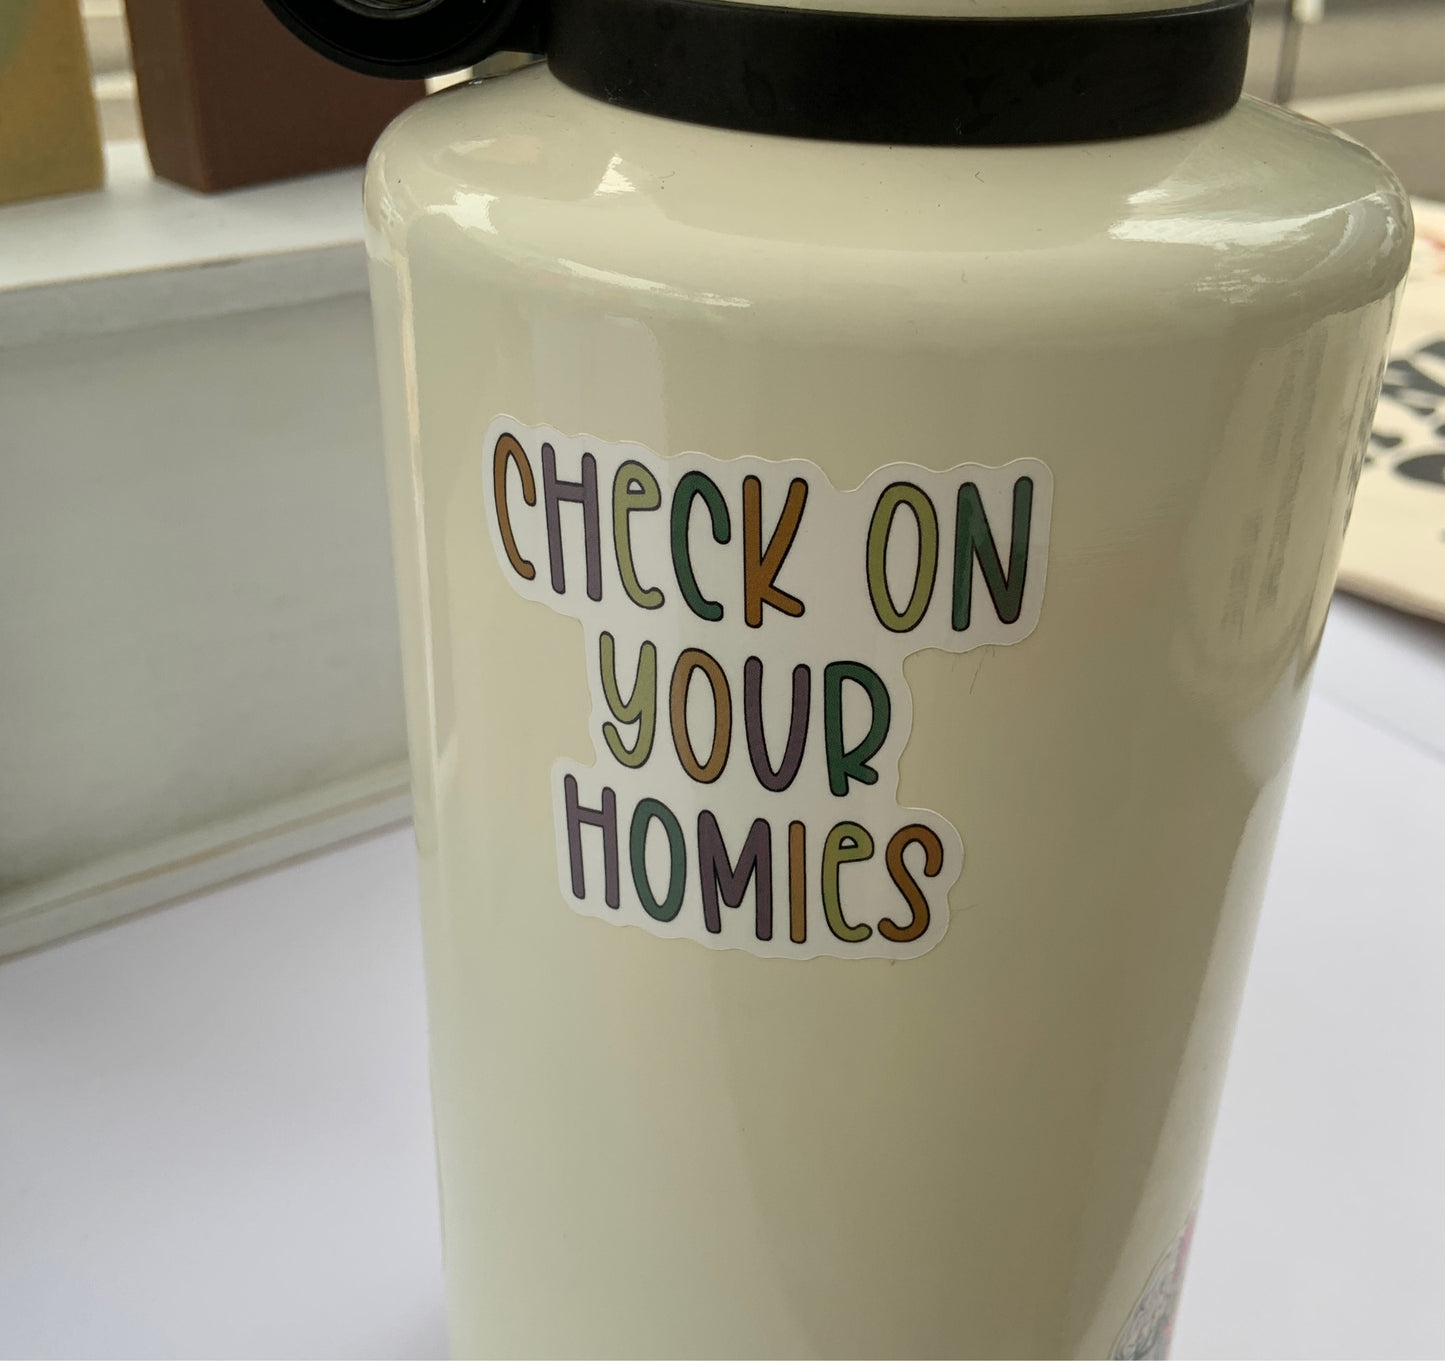 "Check on Your Homies" Sticker